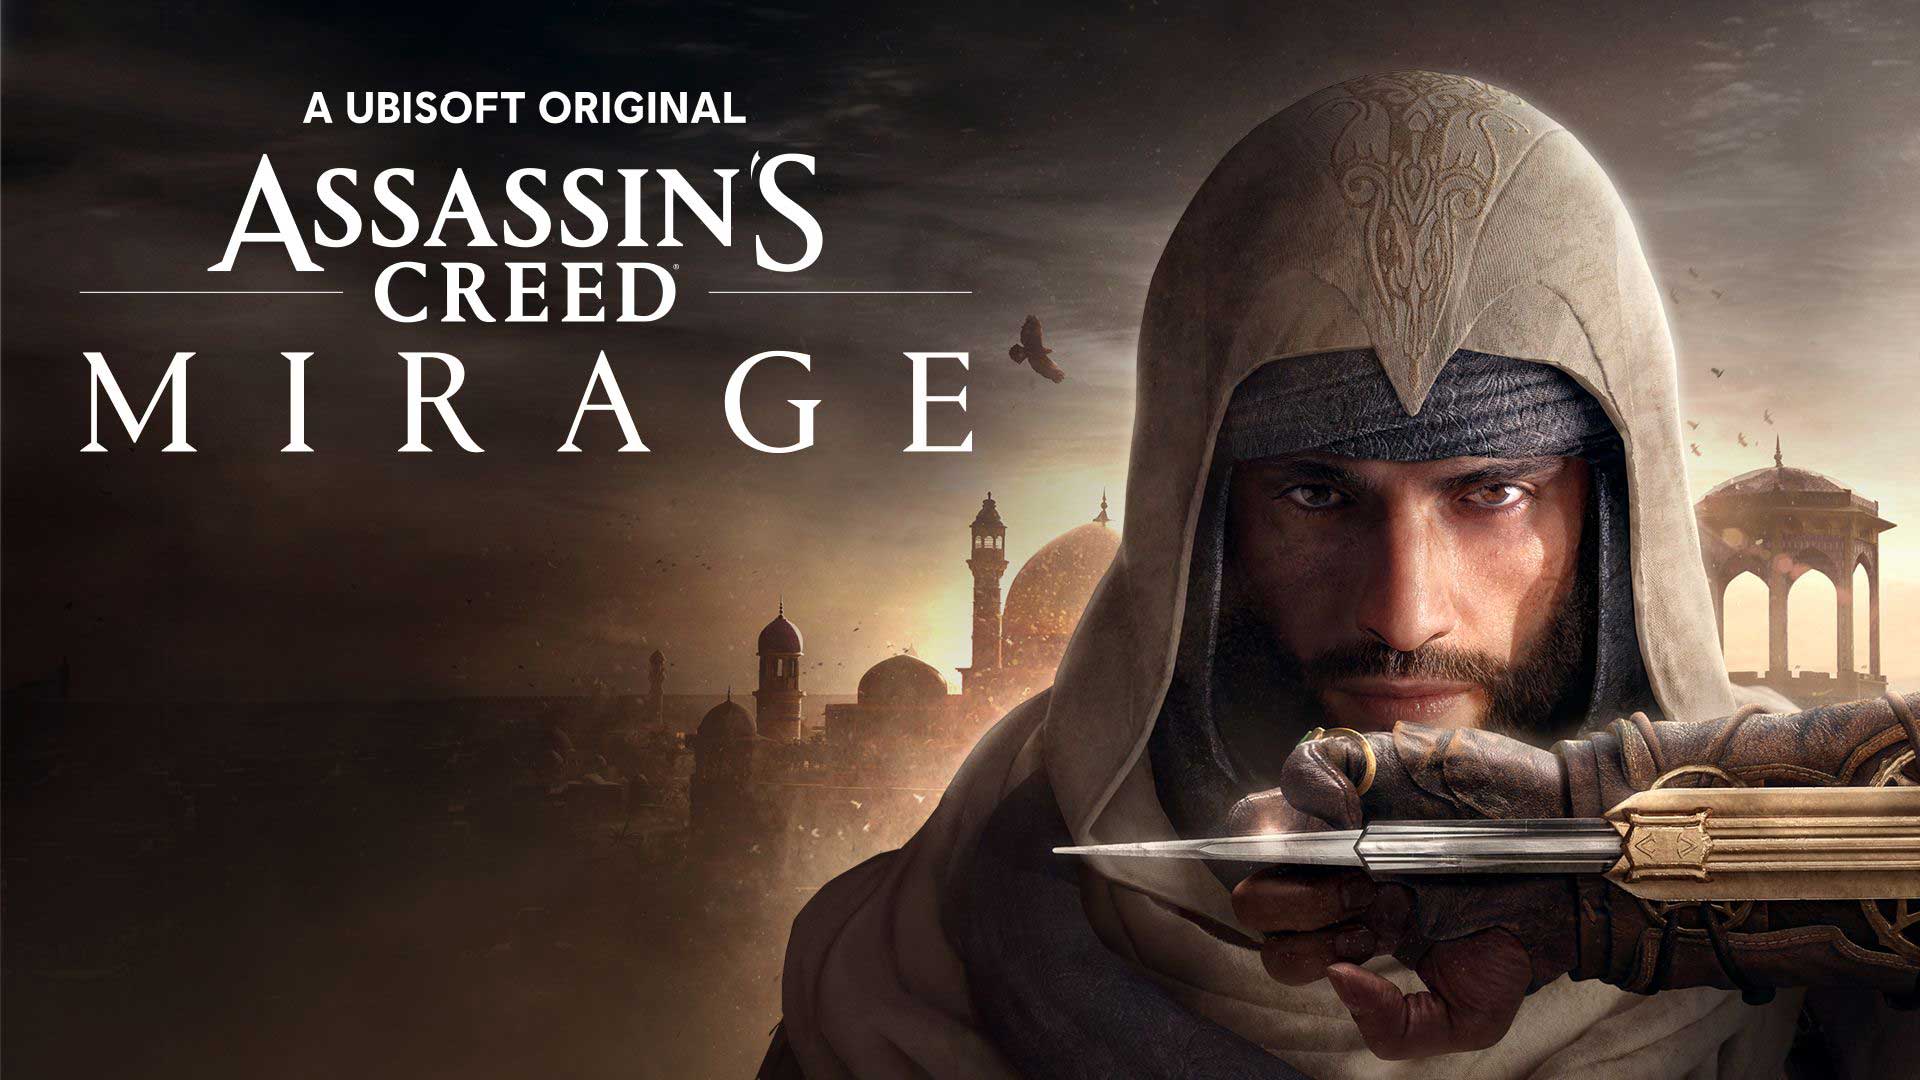 Assassin’s Creed Mirage, Game Pro Central, gameprocentral.com